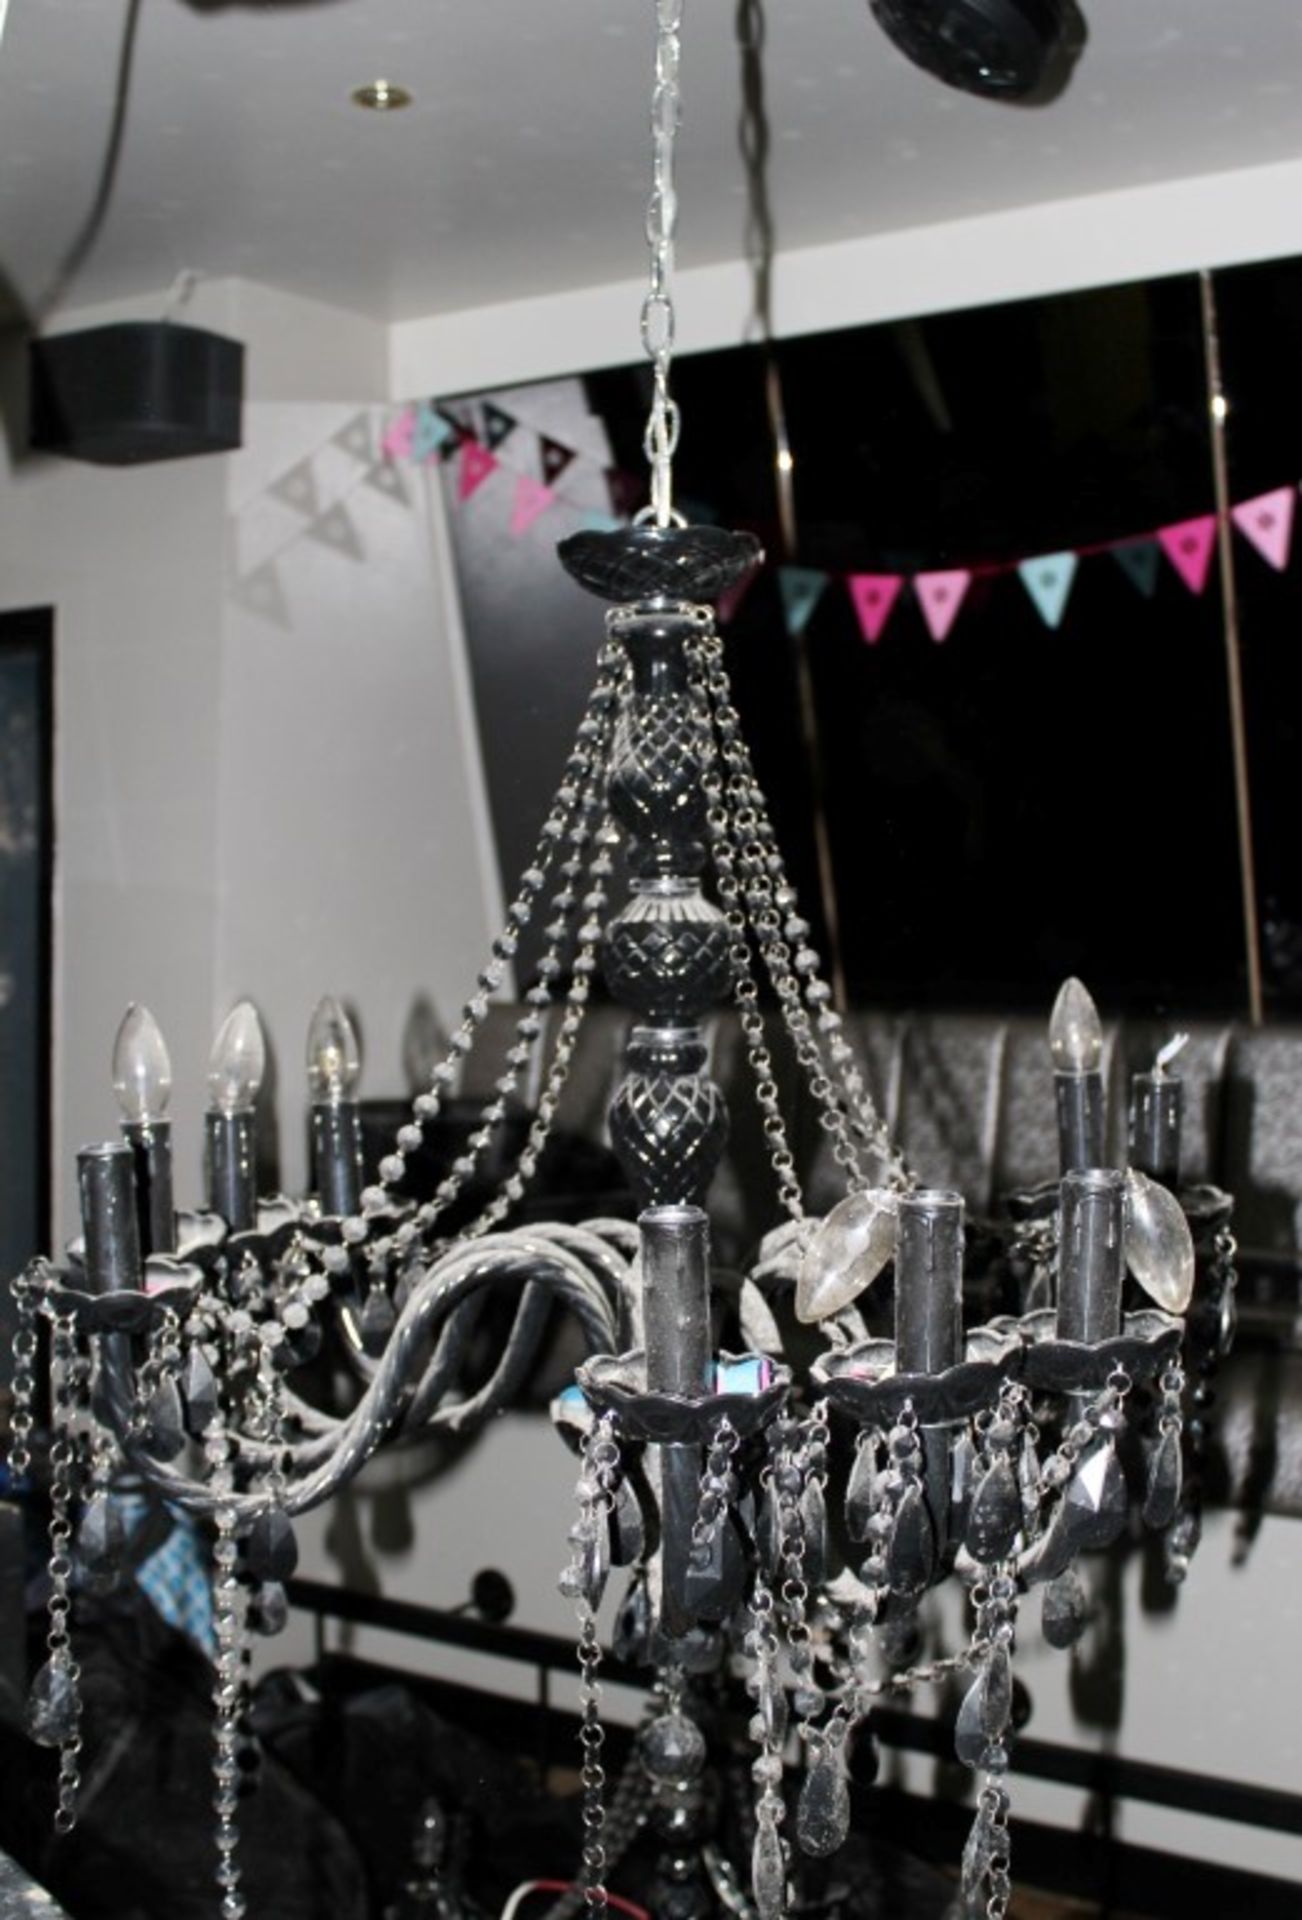 Set of THREE Matching CHANDALIERS Black Gothic Design - CL090 - Ref FBA BL133 - Location: - Image 7 of 8